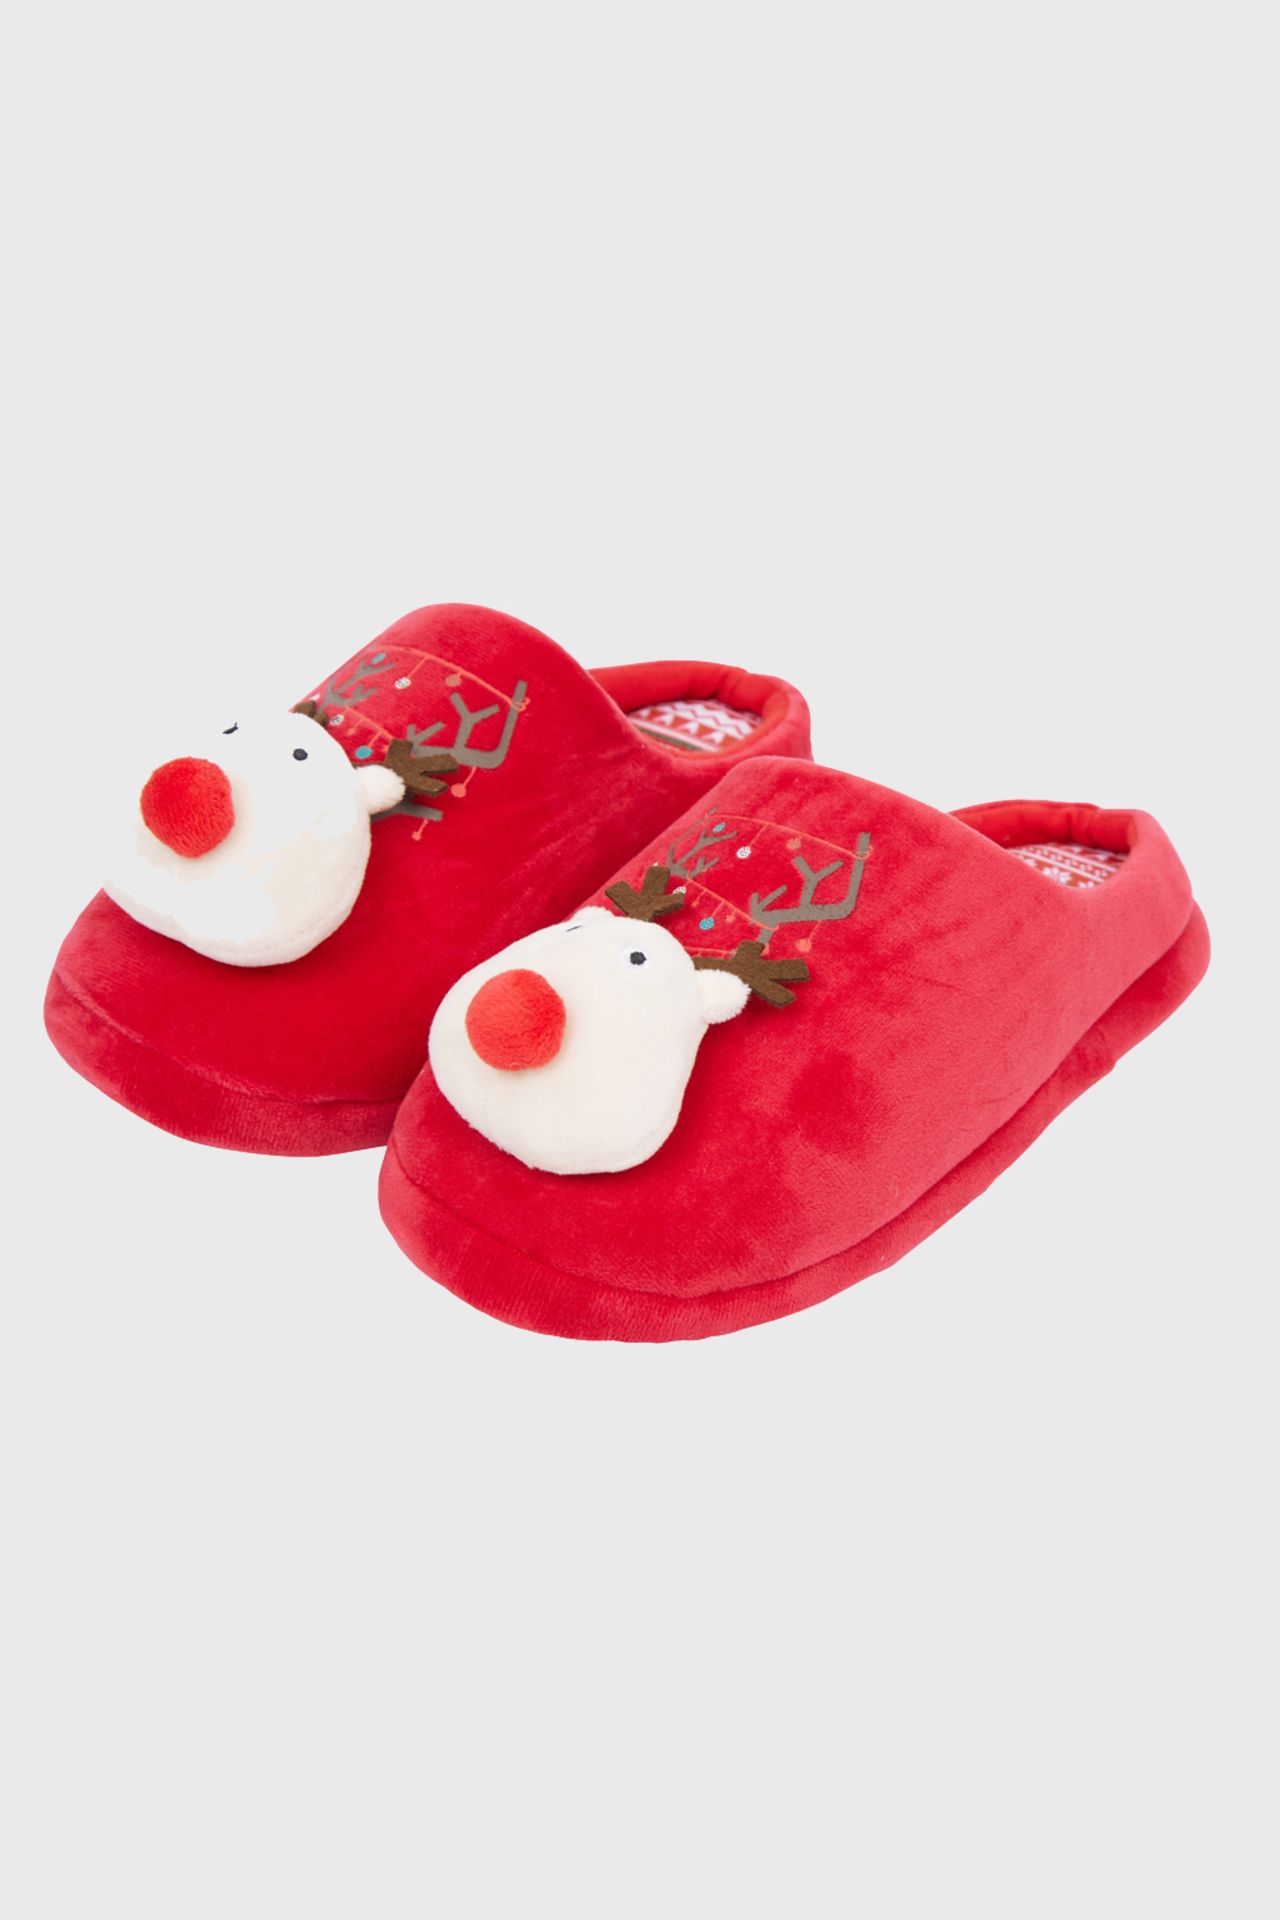 20 X BRAND NEW KIDS CHRISTMAS SLIPPERS TO INCLUDE CHRISTMAS PRINT FOXY RED RUDOLPH SLIPPERS (4 X